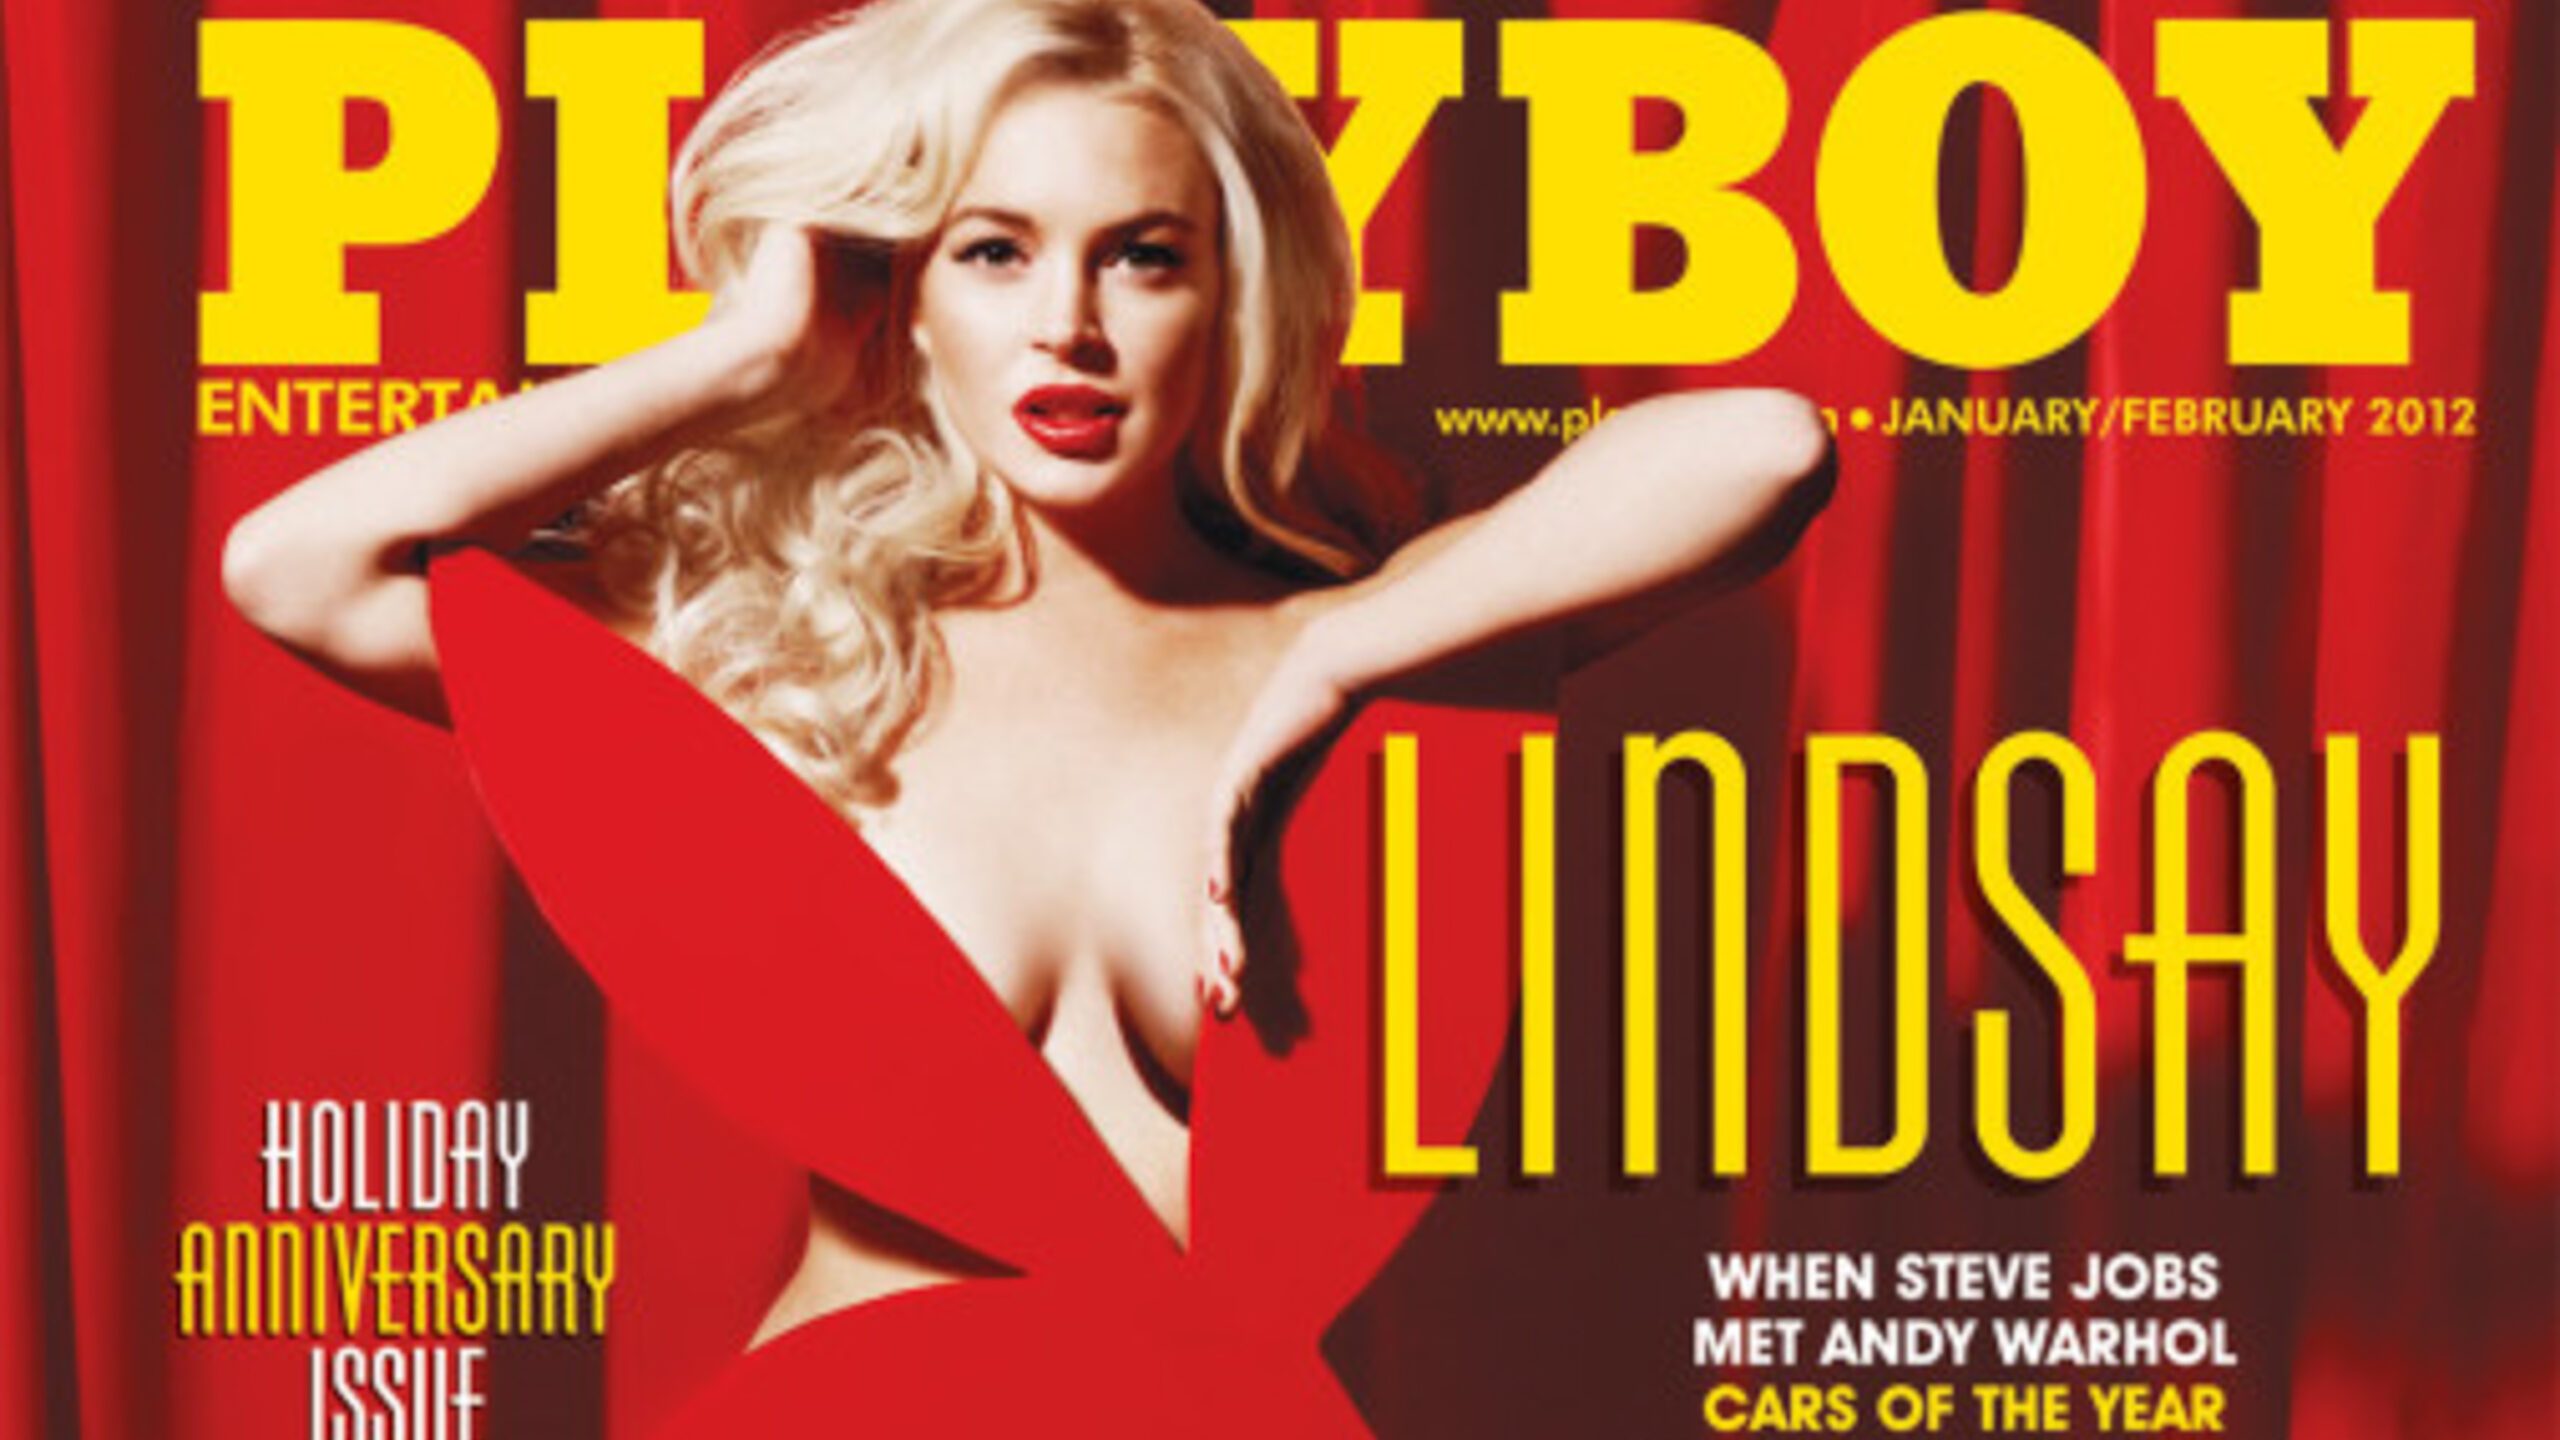 LOOK: 10 of ‘Playboy’ magazine’s most controversial covers